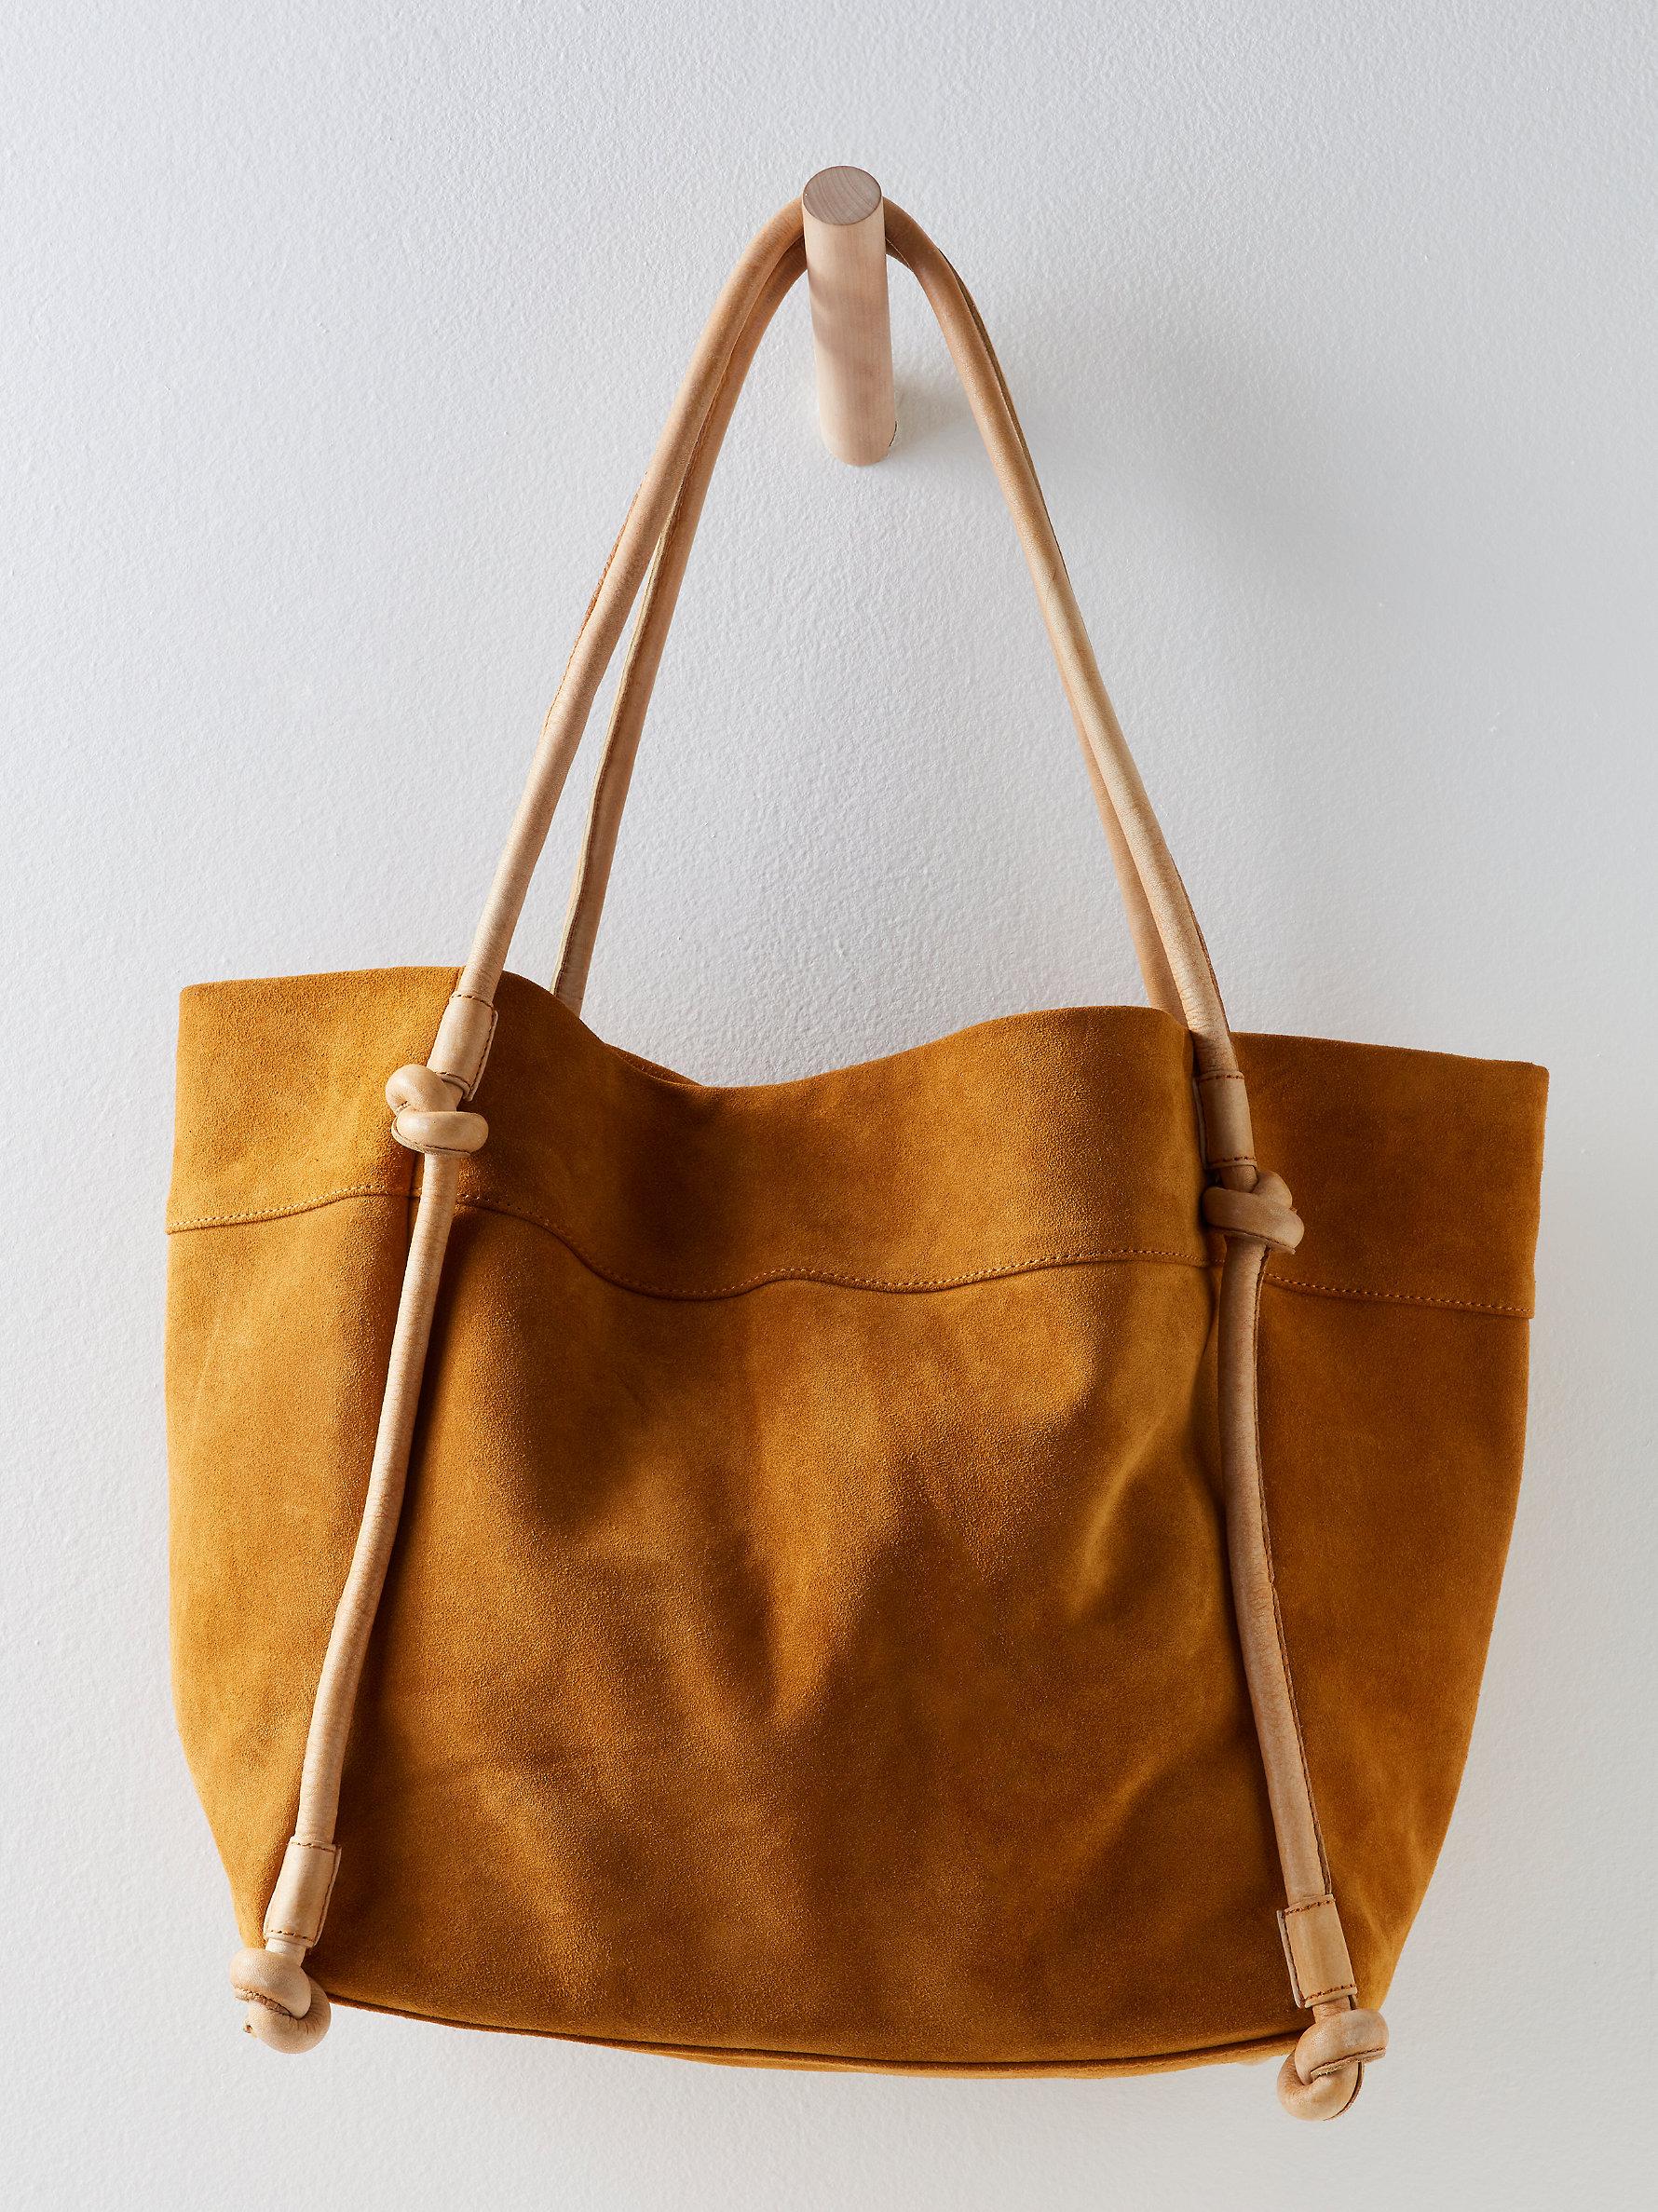 FREE PEOPLE Jessa Suede Carryall bag